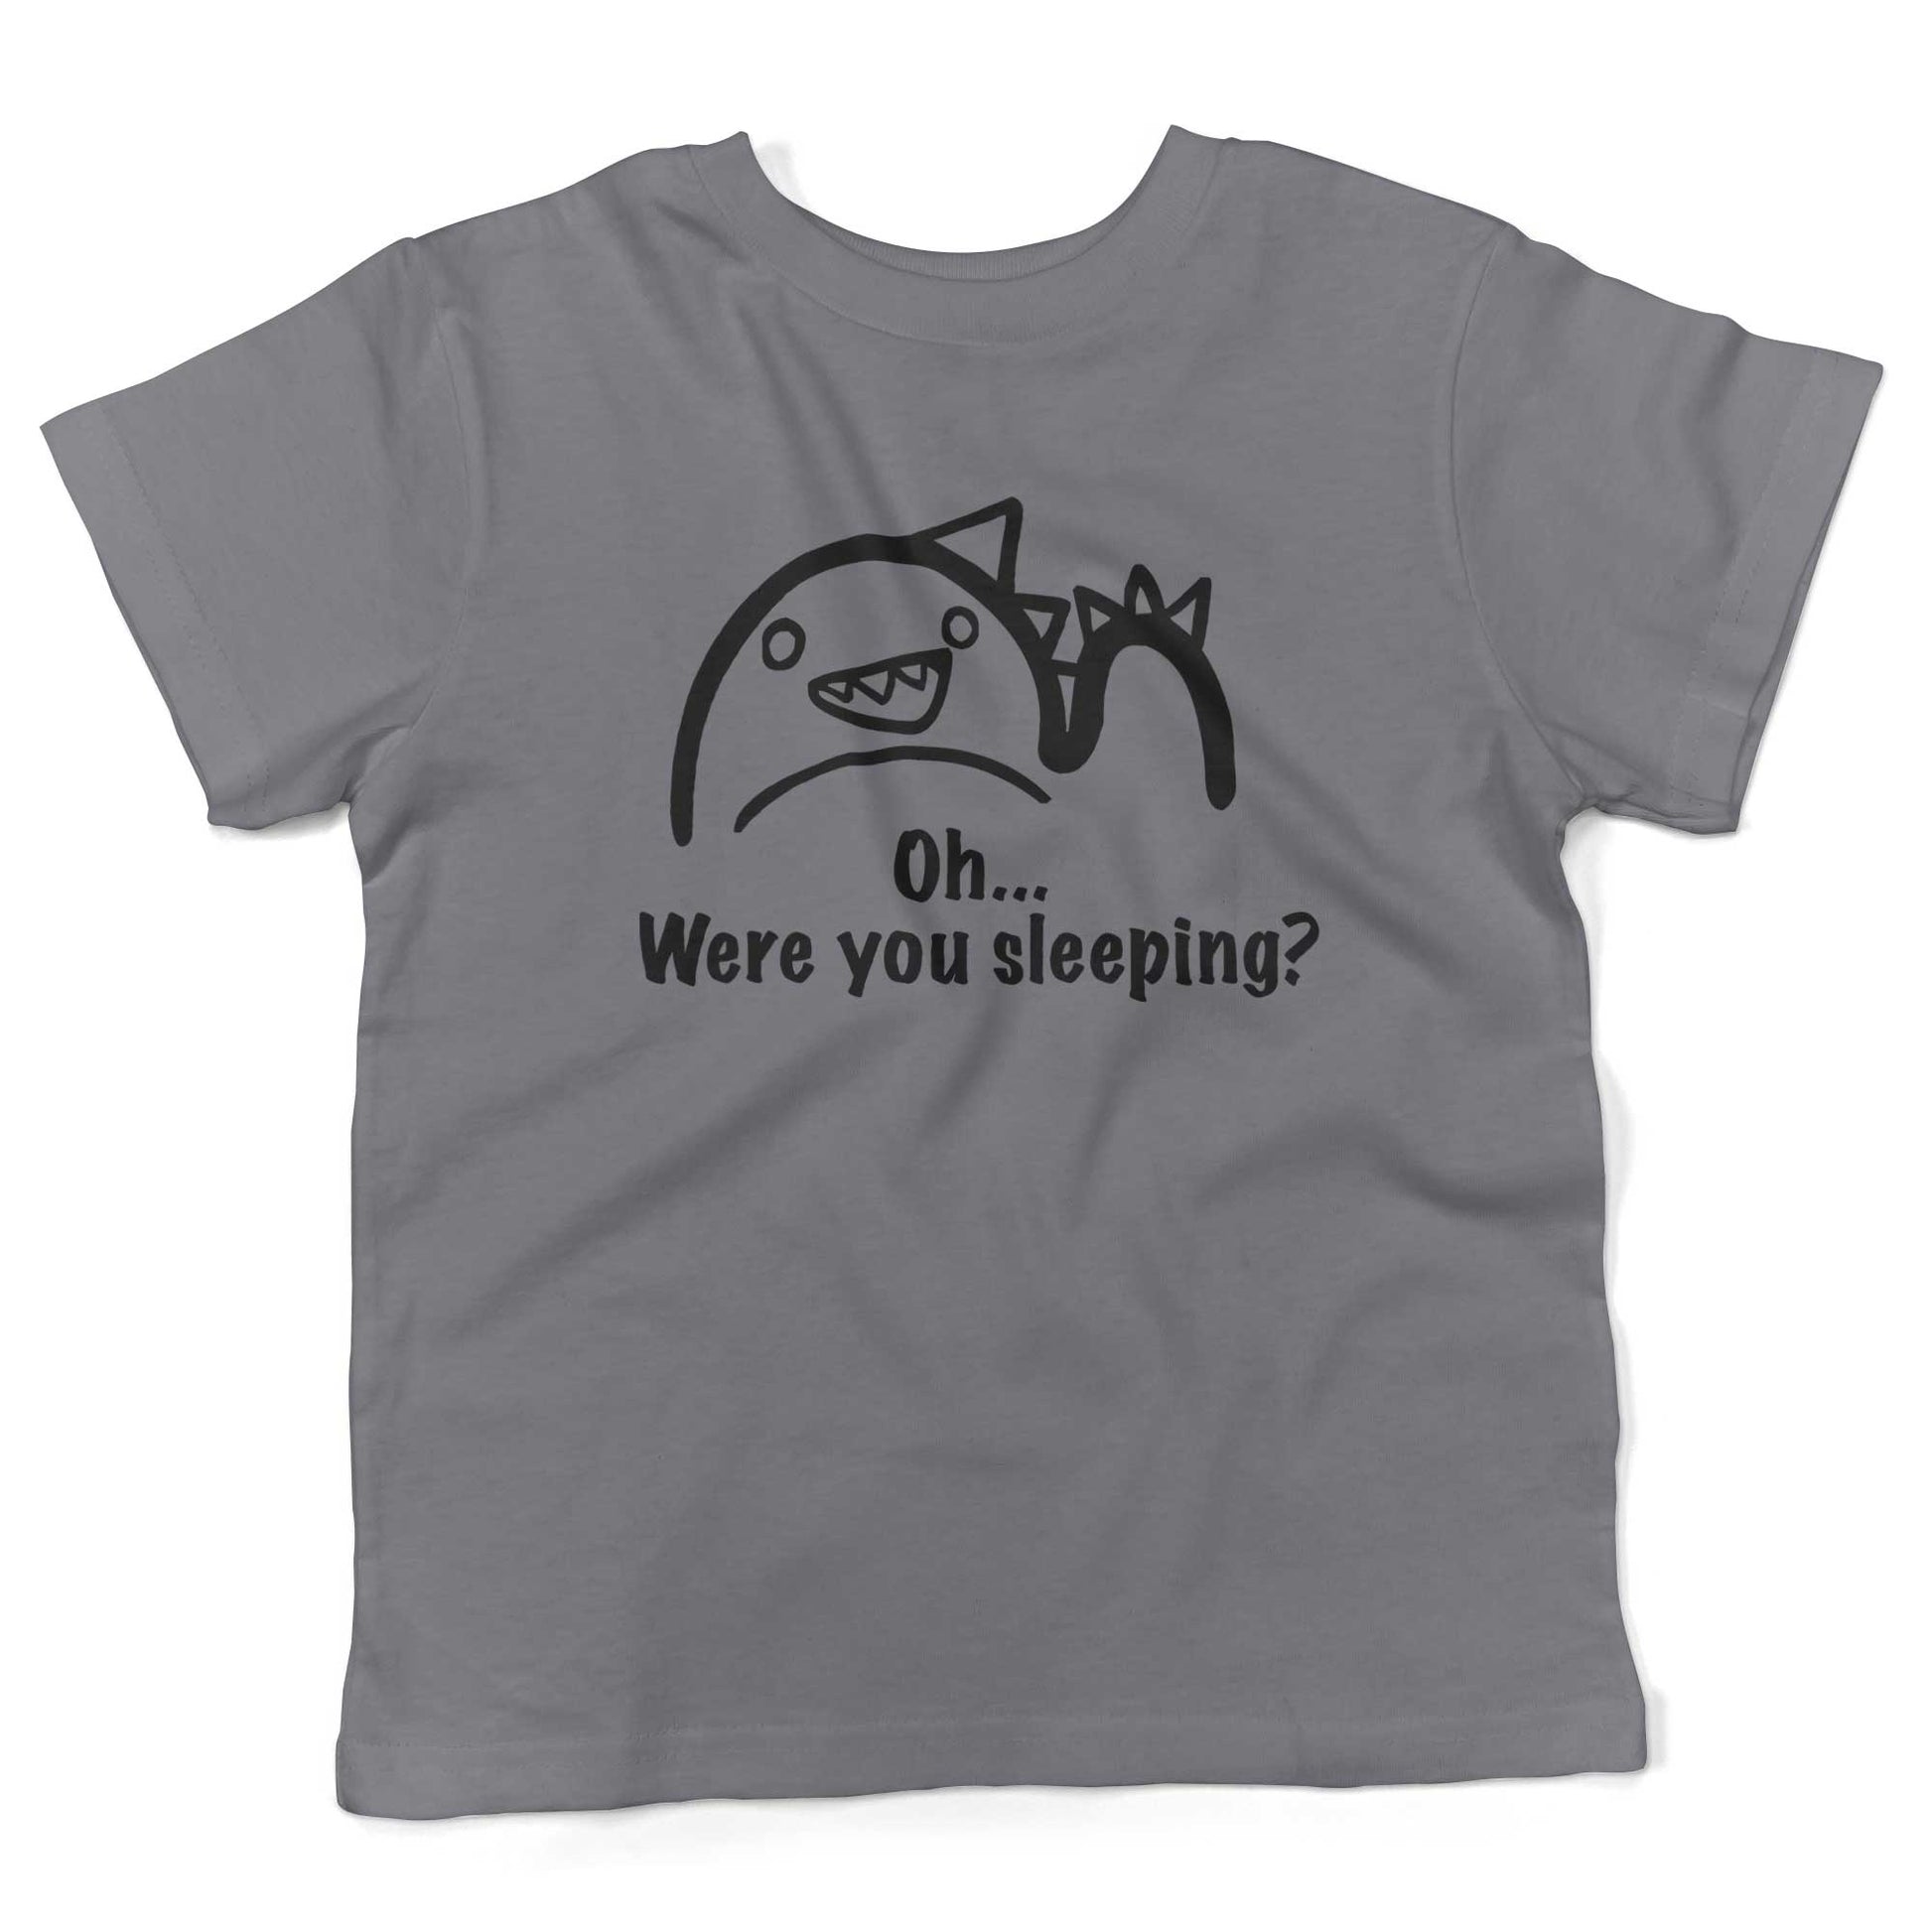 Oh...Were you sleeping? Toddler Shirt-Slate-2T